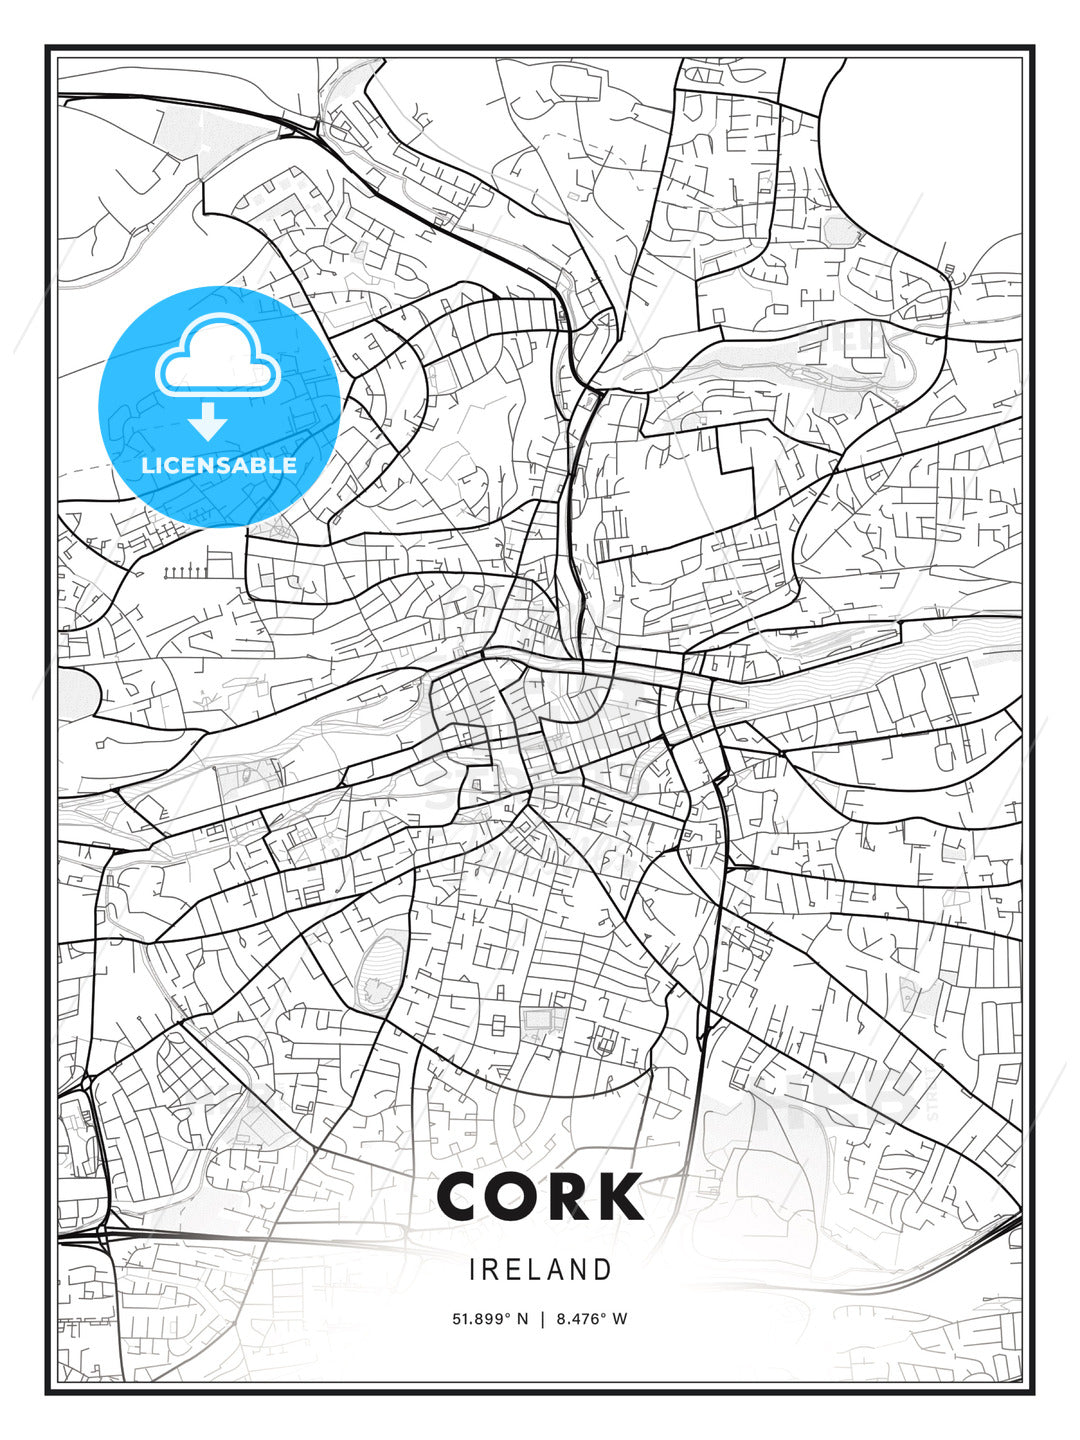 Cork, Ireland, Modern Print Template in Various Formats - HEBSTREITS Sketches